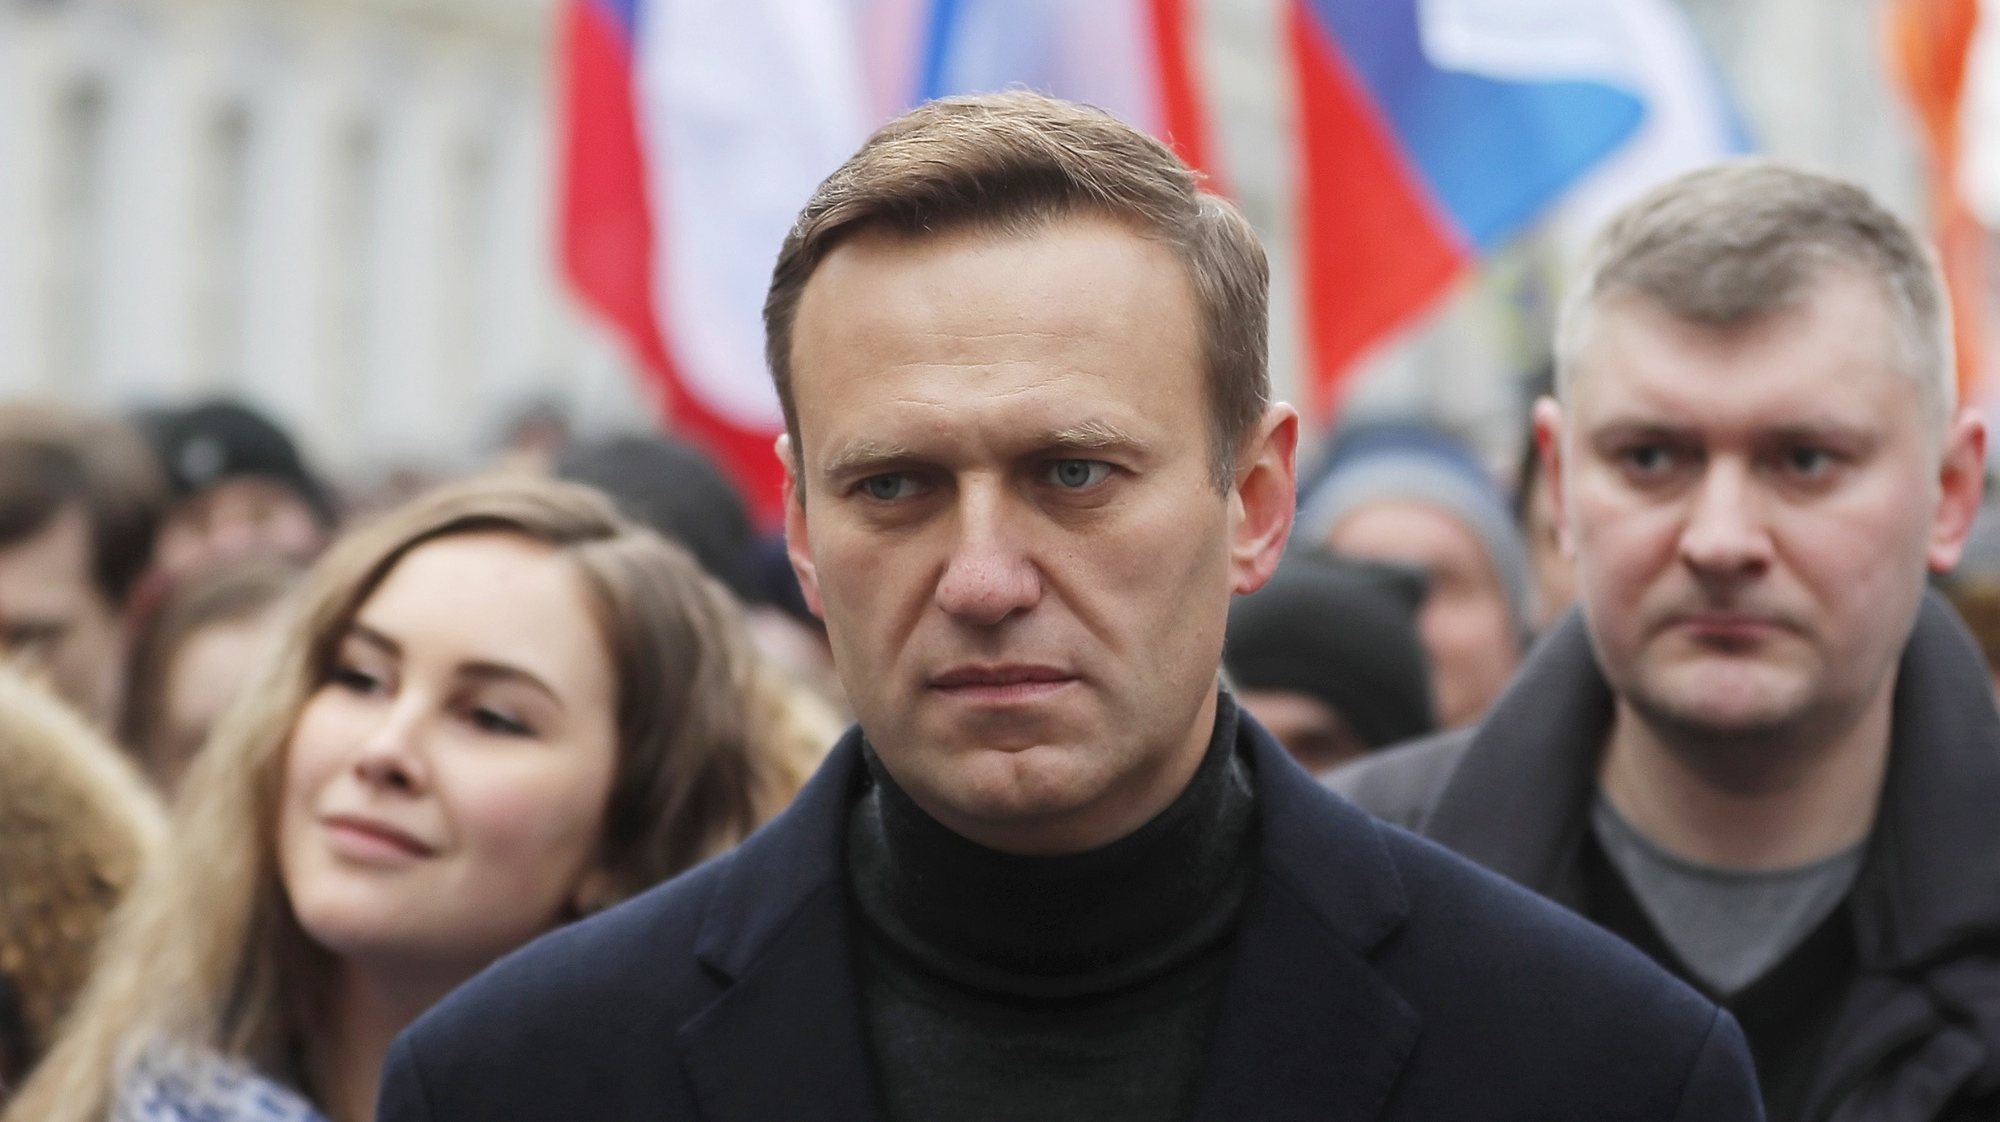 epa08760927 YEARENDER 2020 PERSONALITIESRussian opposition leader and anti-corruption activist Alexei Navalny (C) takes part in a memorial march for Boris Nemtsov marking the fifth anniversary of his assassination in Moscow, Russia, 29 February 2020. Navalny is received treatment at the Charite hospital in Berlin after being poisoned with a nerve agent from the Novichok group. EPA/YURI KOCHETKOV *** Local Caption *** 55916462